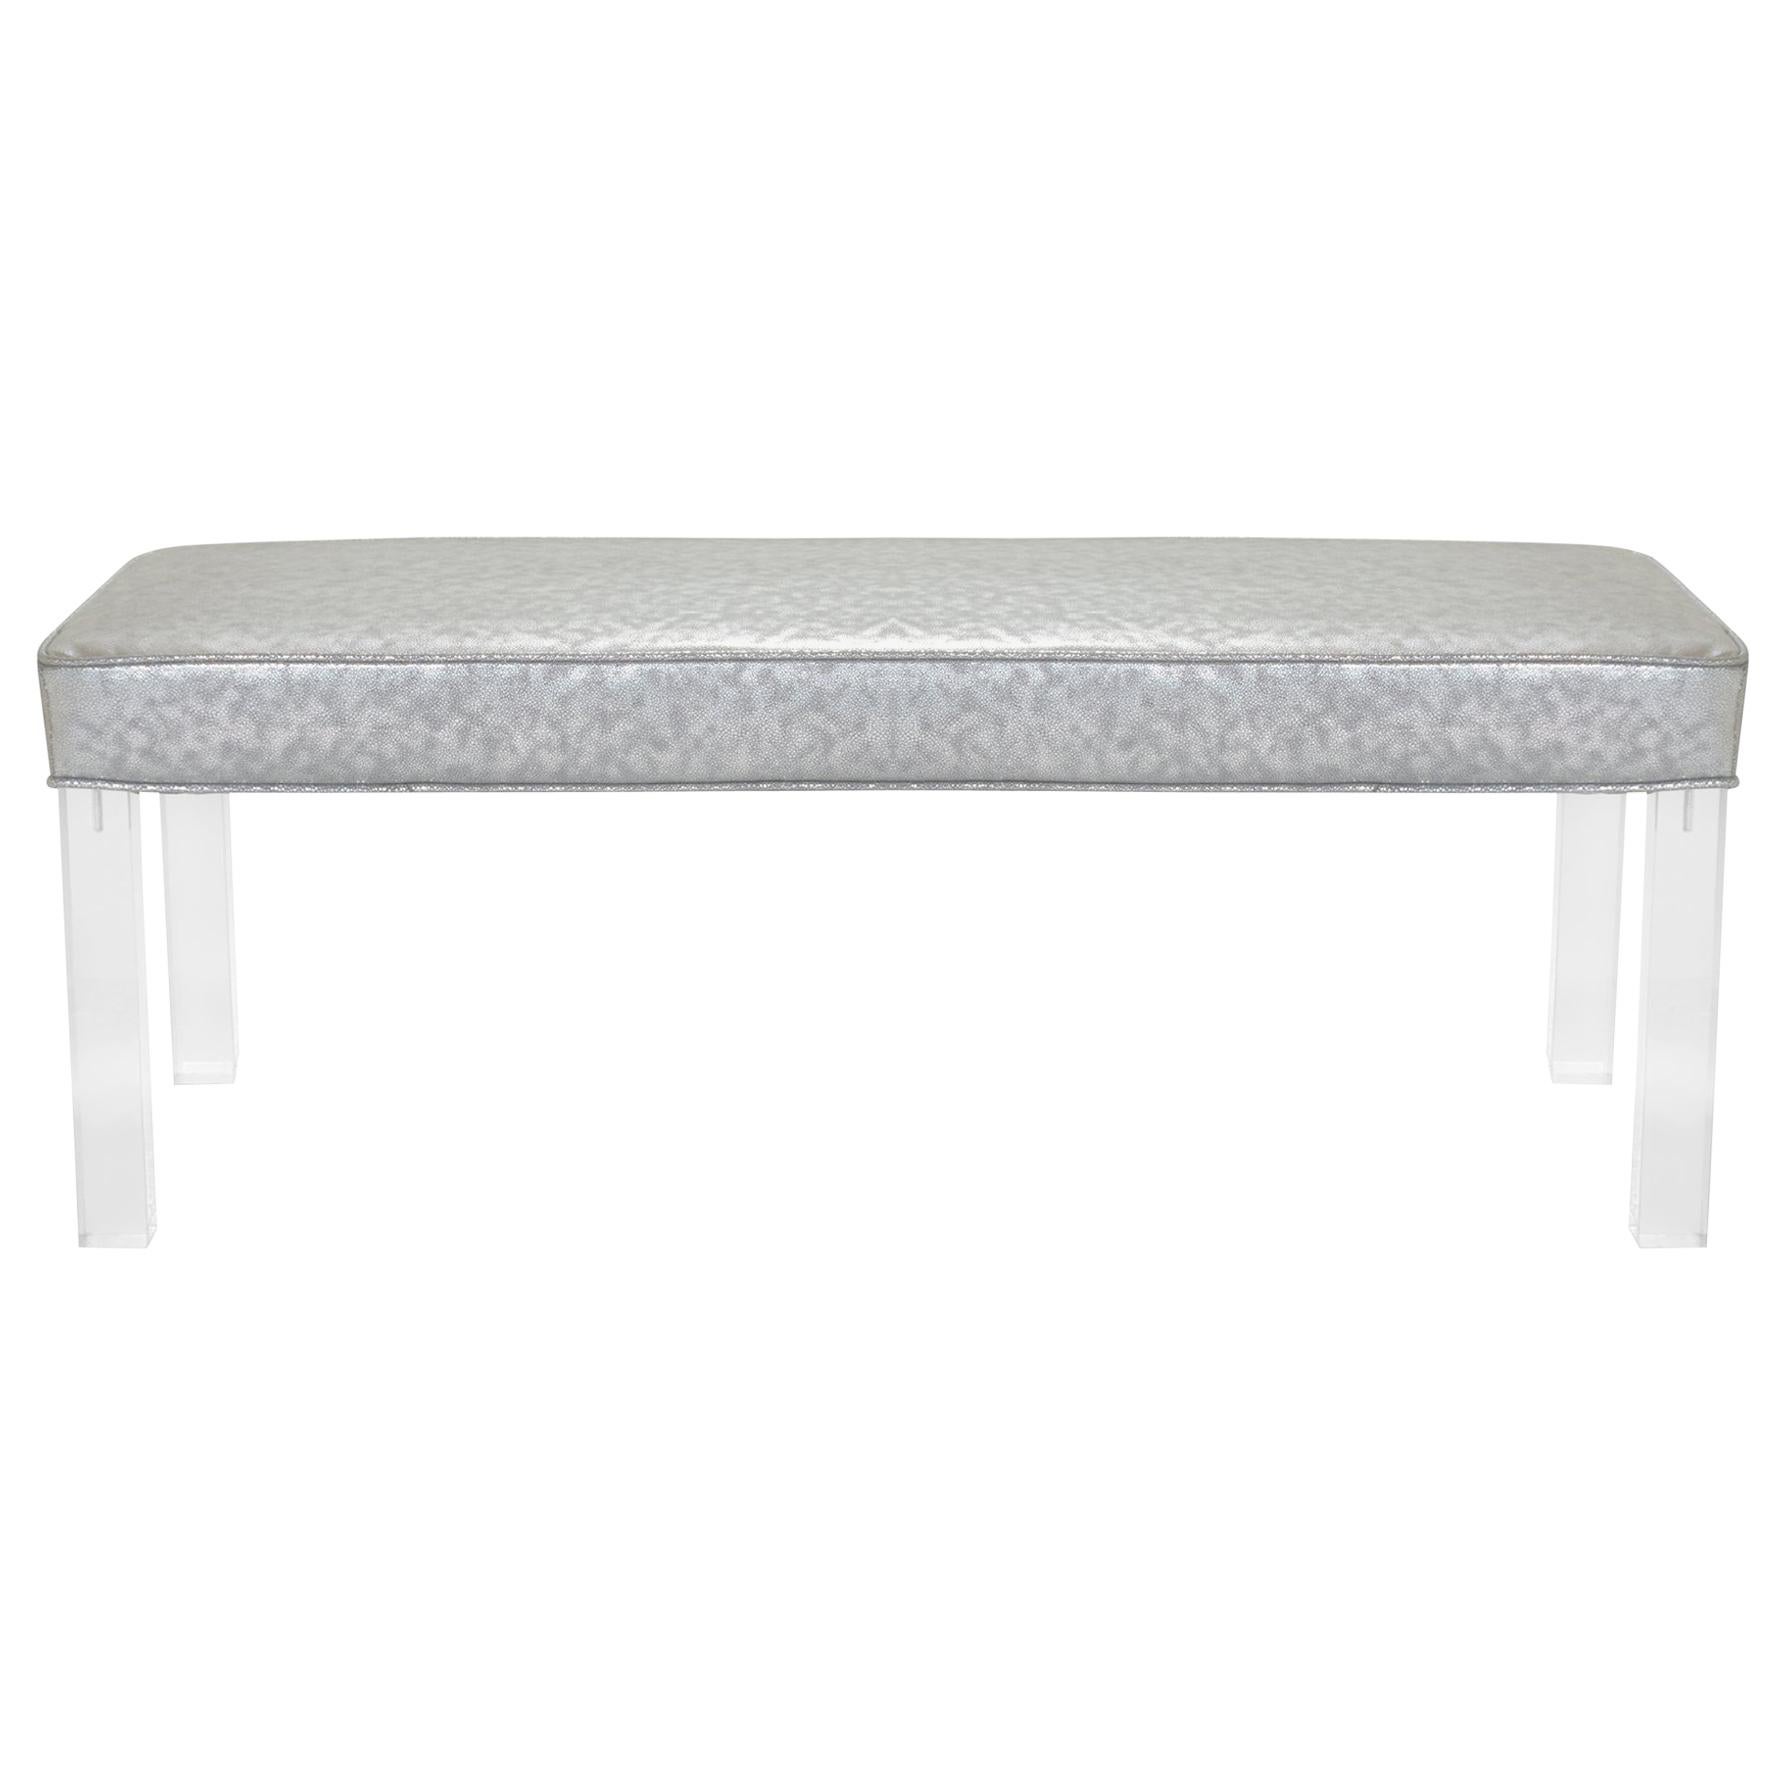 Prism Bench in Sharkskin Motif Leather by Montage For Sale